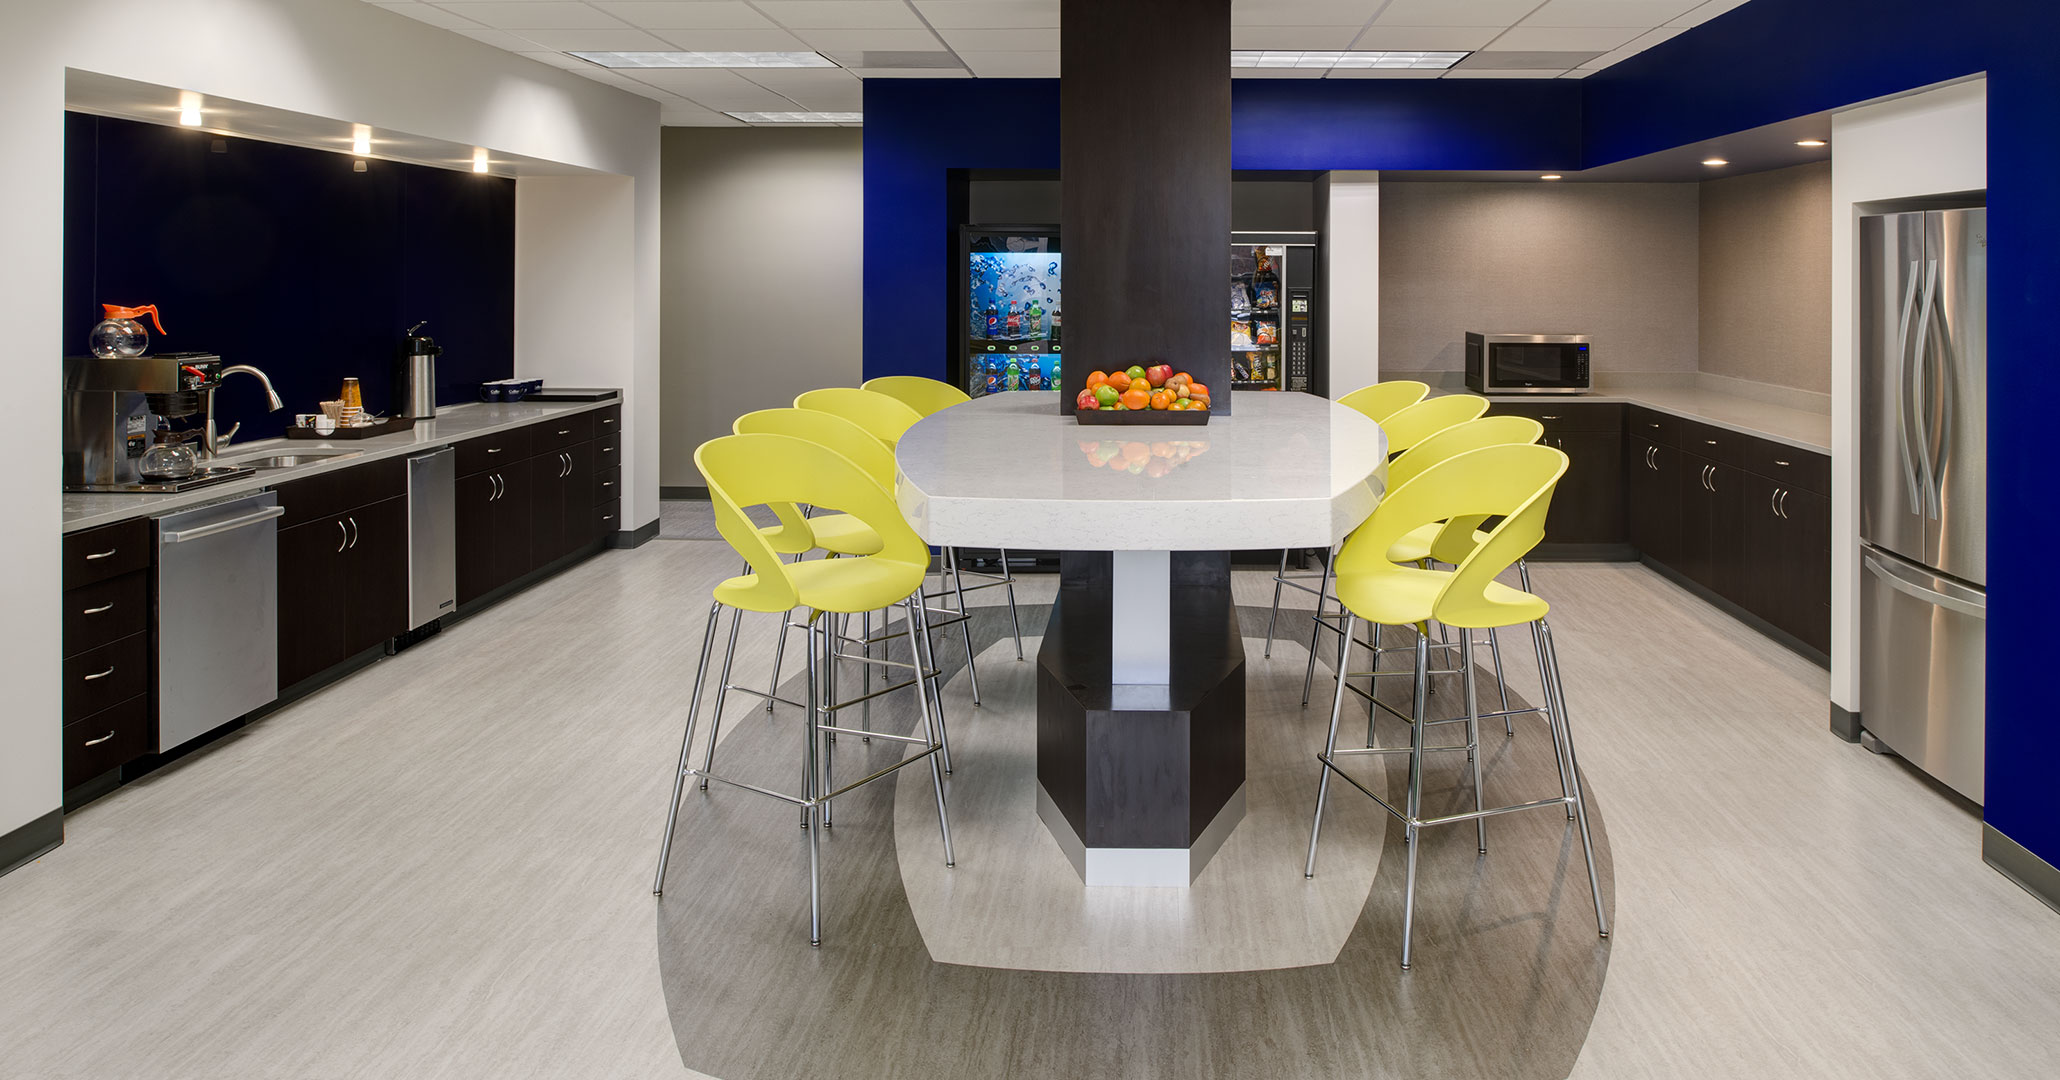 Boudreaux architects worked with Colliers to provide interior design services to create an open office plan.